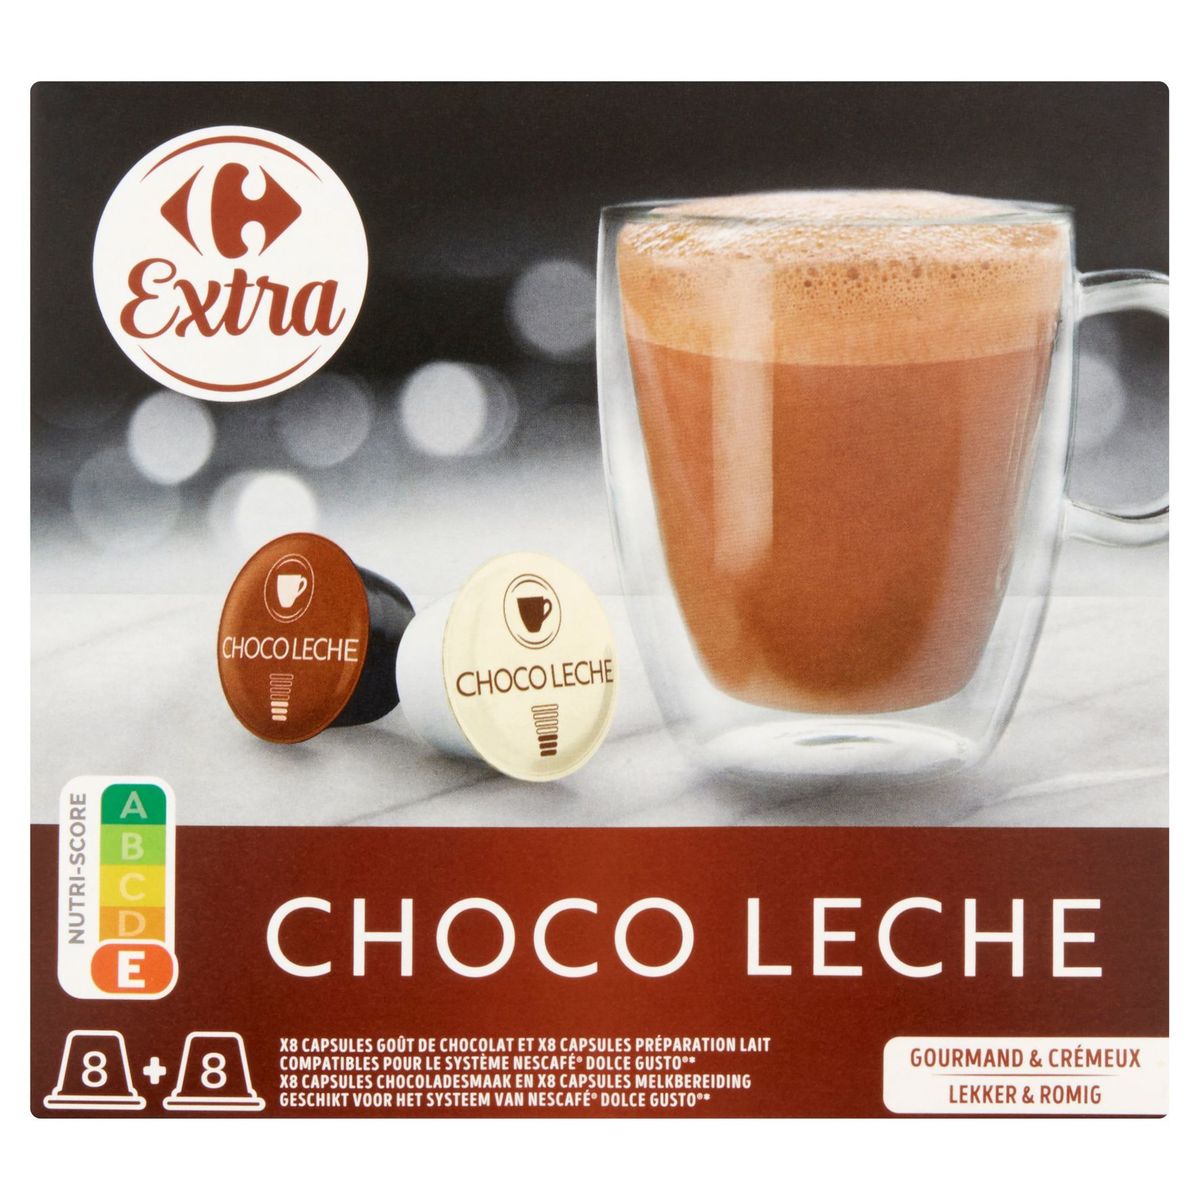 Carrefour Extra Choco Leche 250.4 g